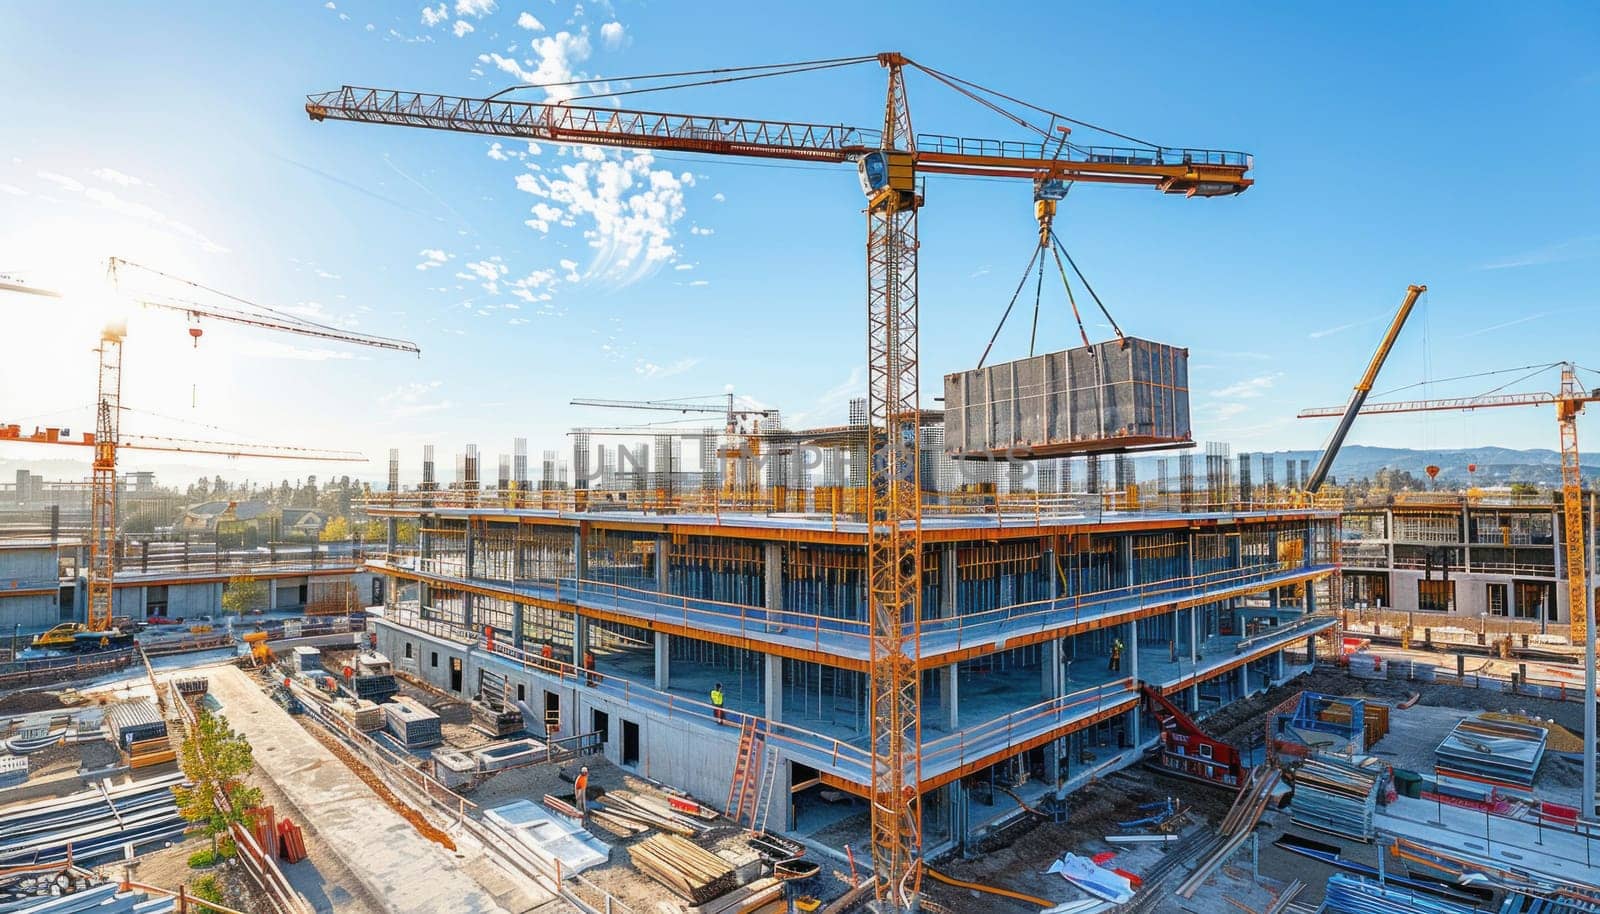 Construction of a large building is currently underway, with several cranes operating at the construction site